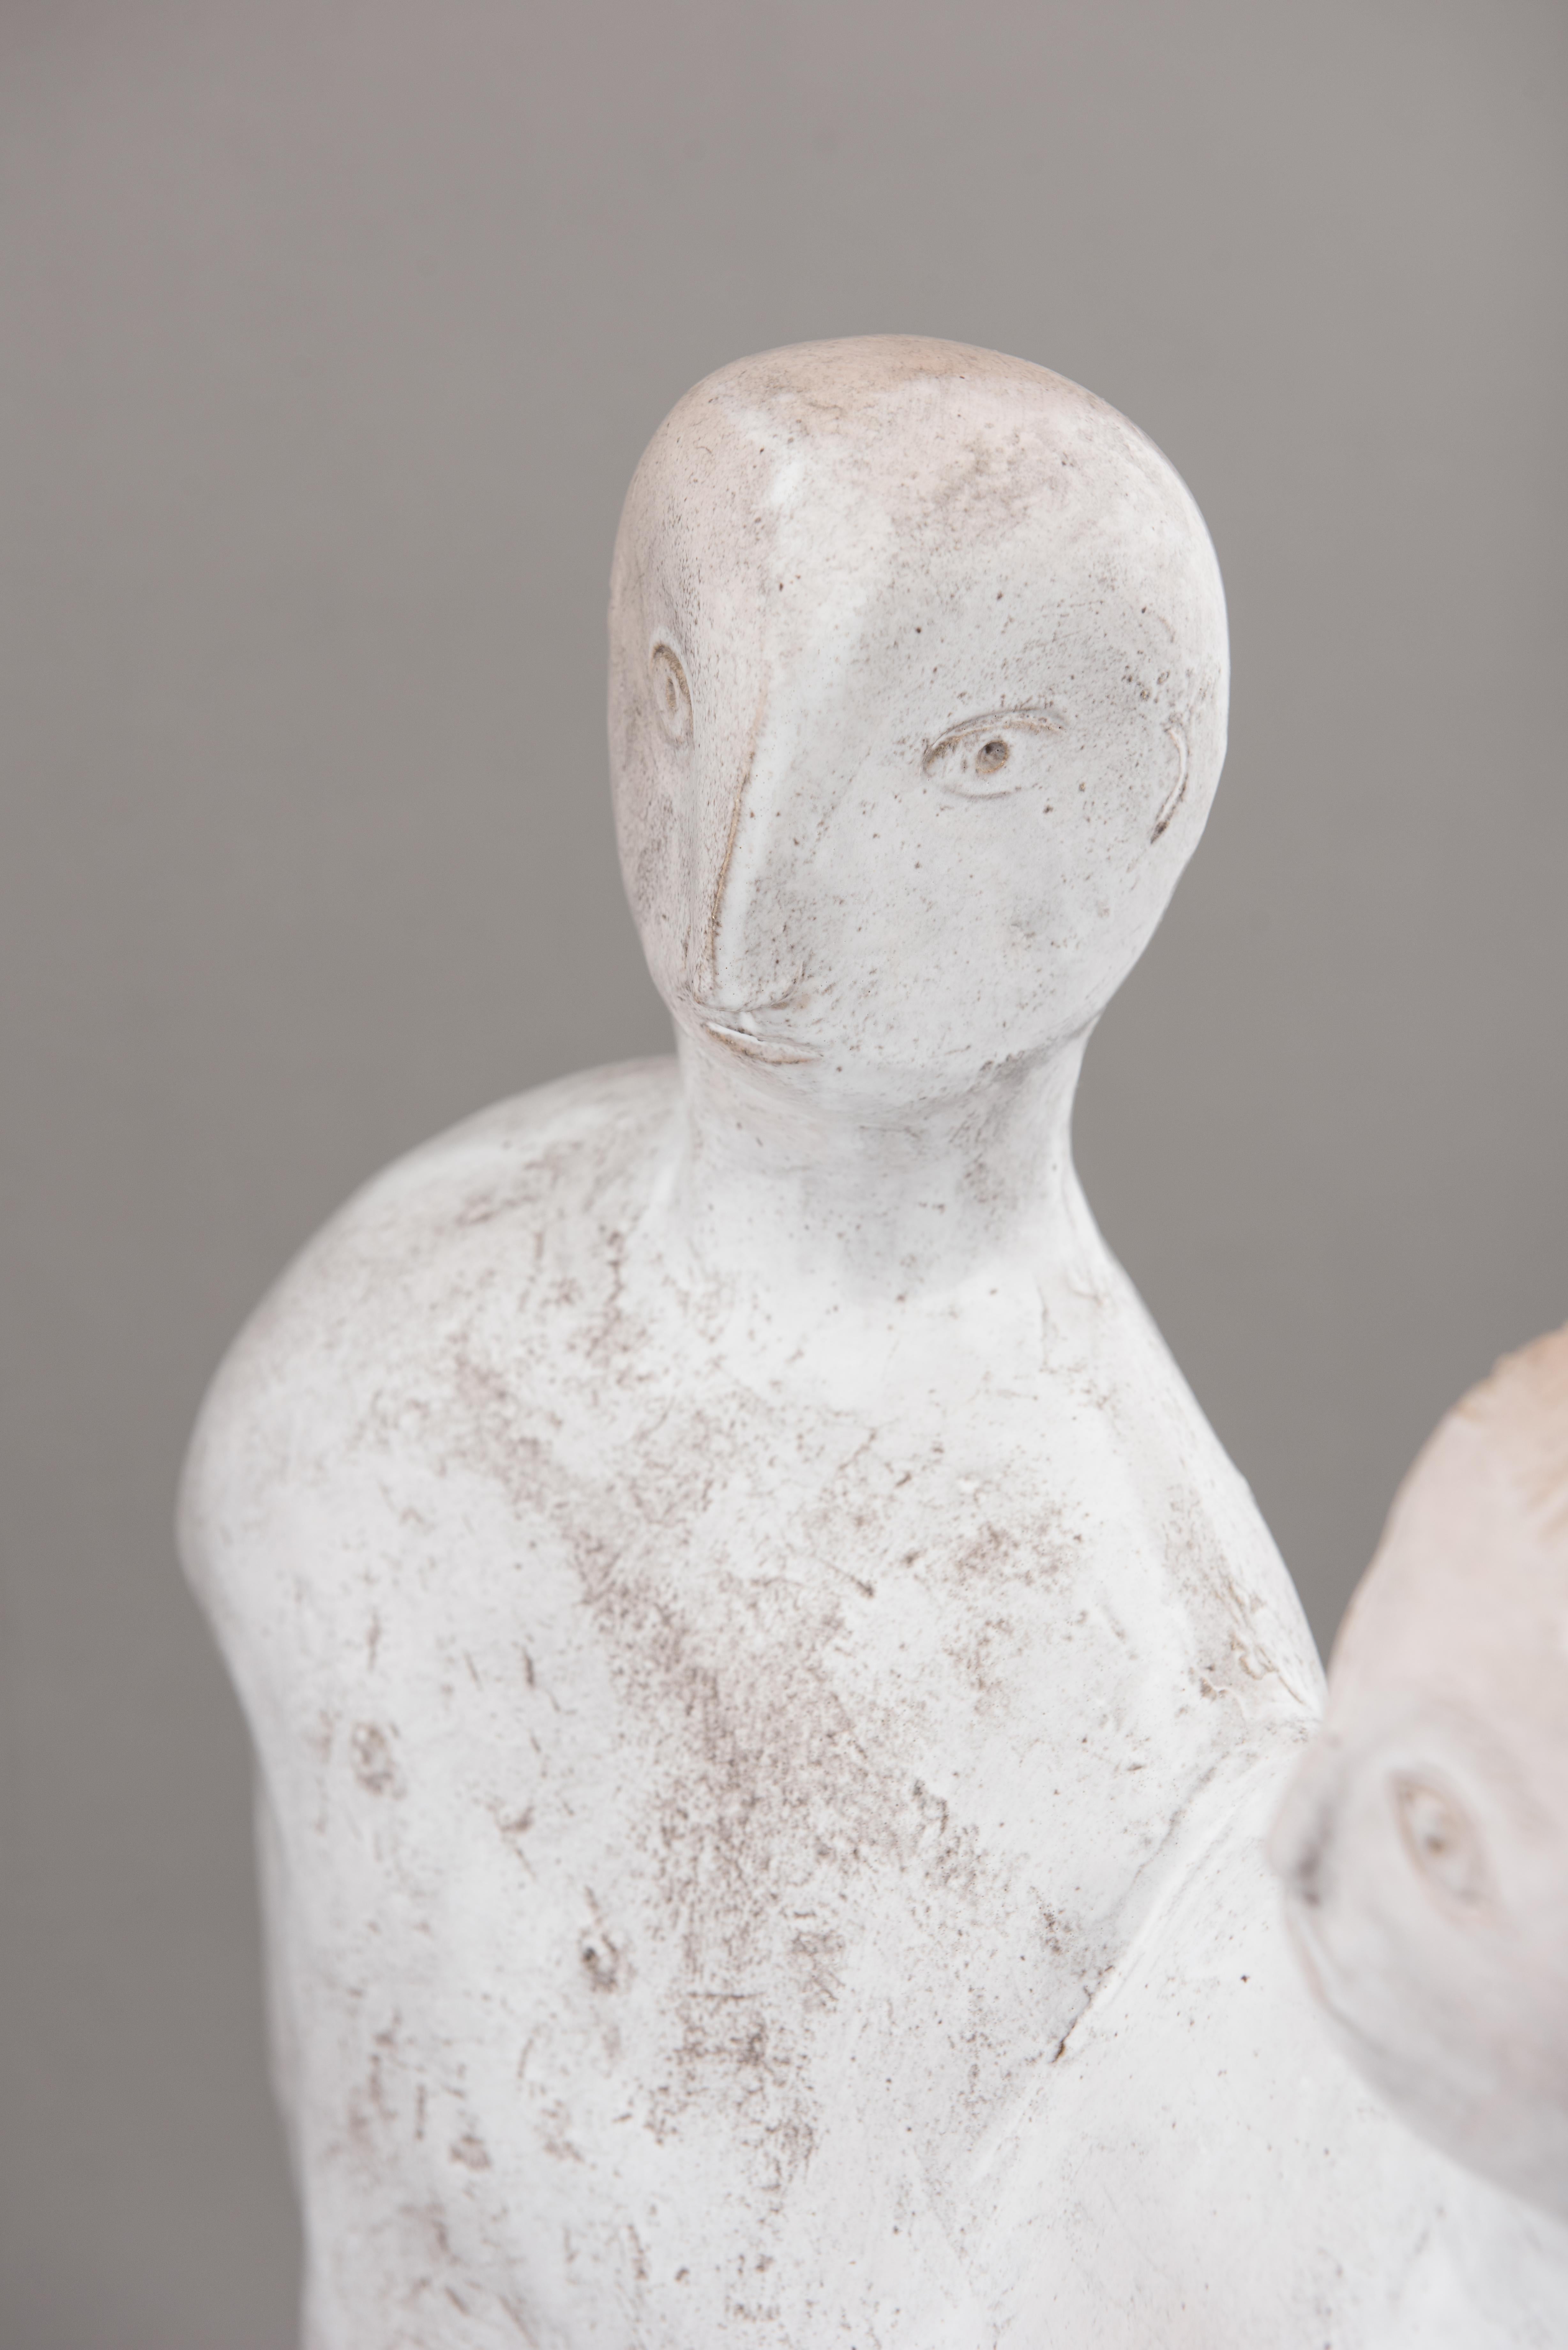 Late 20th Century Ceramic Sculpture by Cloutiers Frères, circa 1990